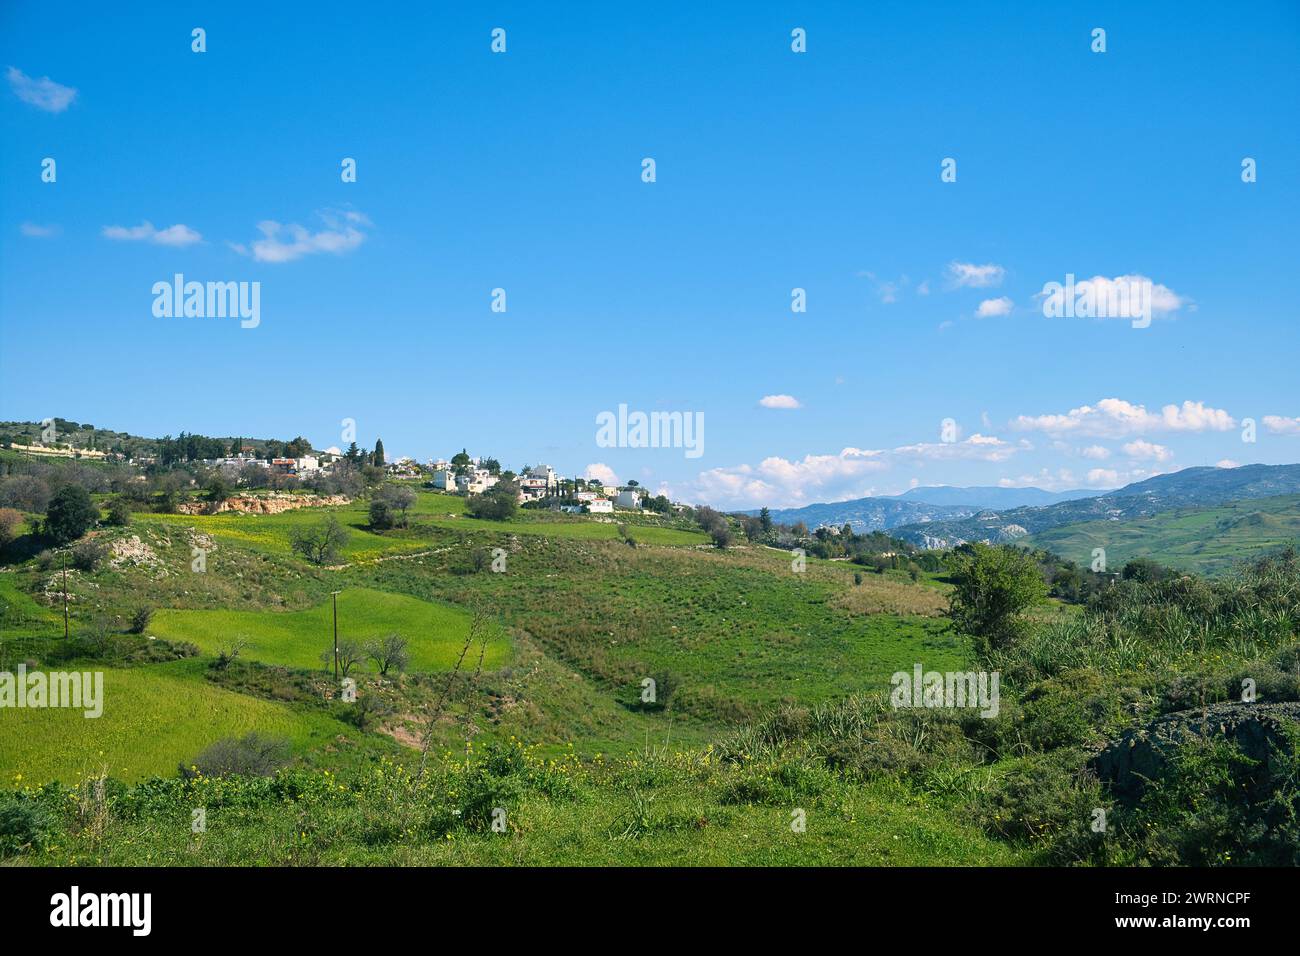 Landscape with green fields, mountains and a village near Nata, district of Paphos (Pafos), Cyprus, on a sunny day Stock Photo